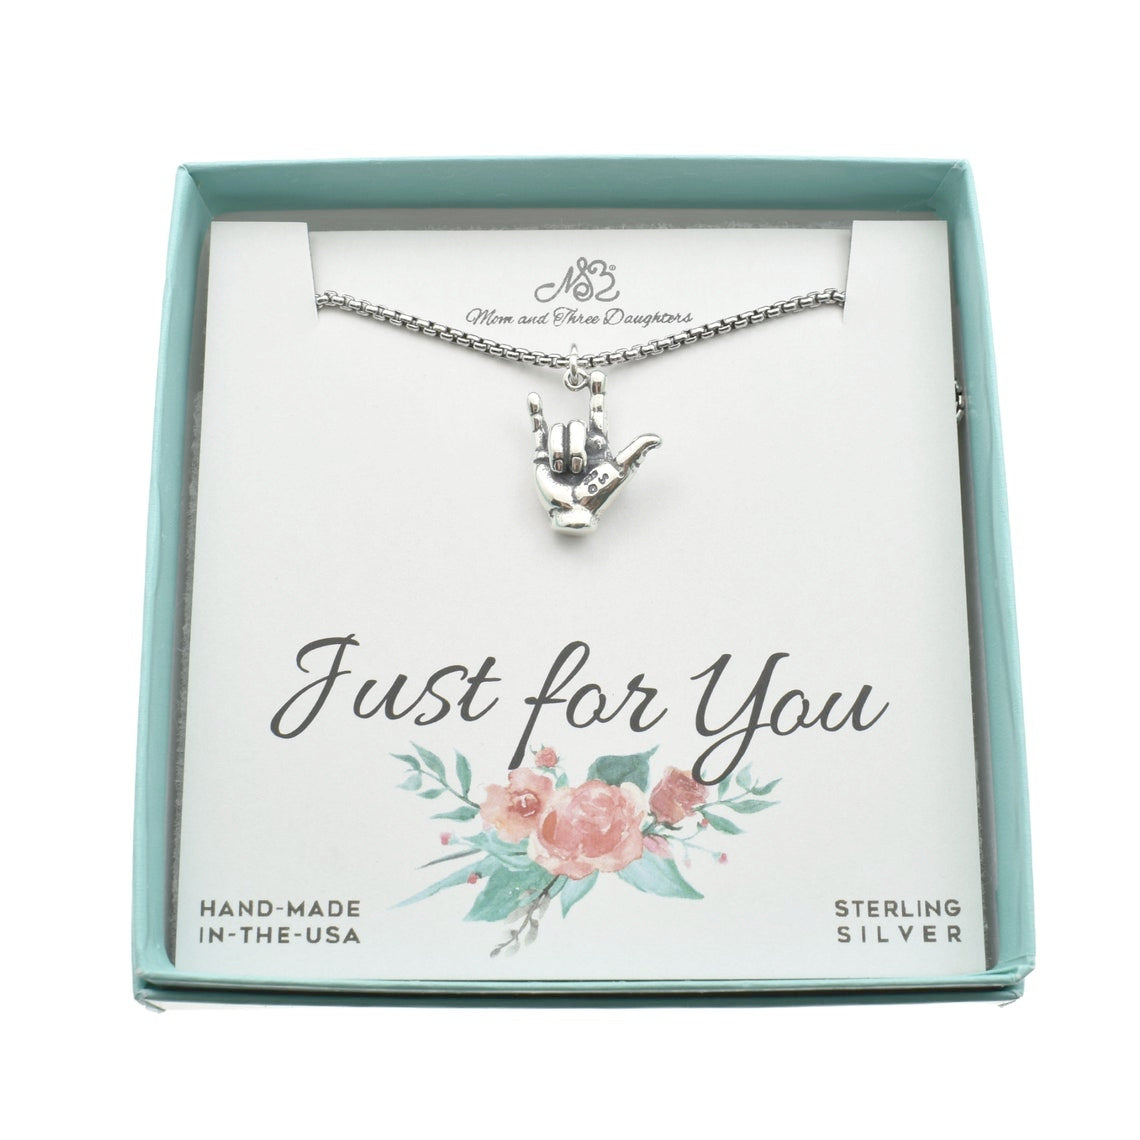 I Love You in American Sign Language Necklace in Sterling Silver